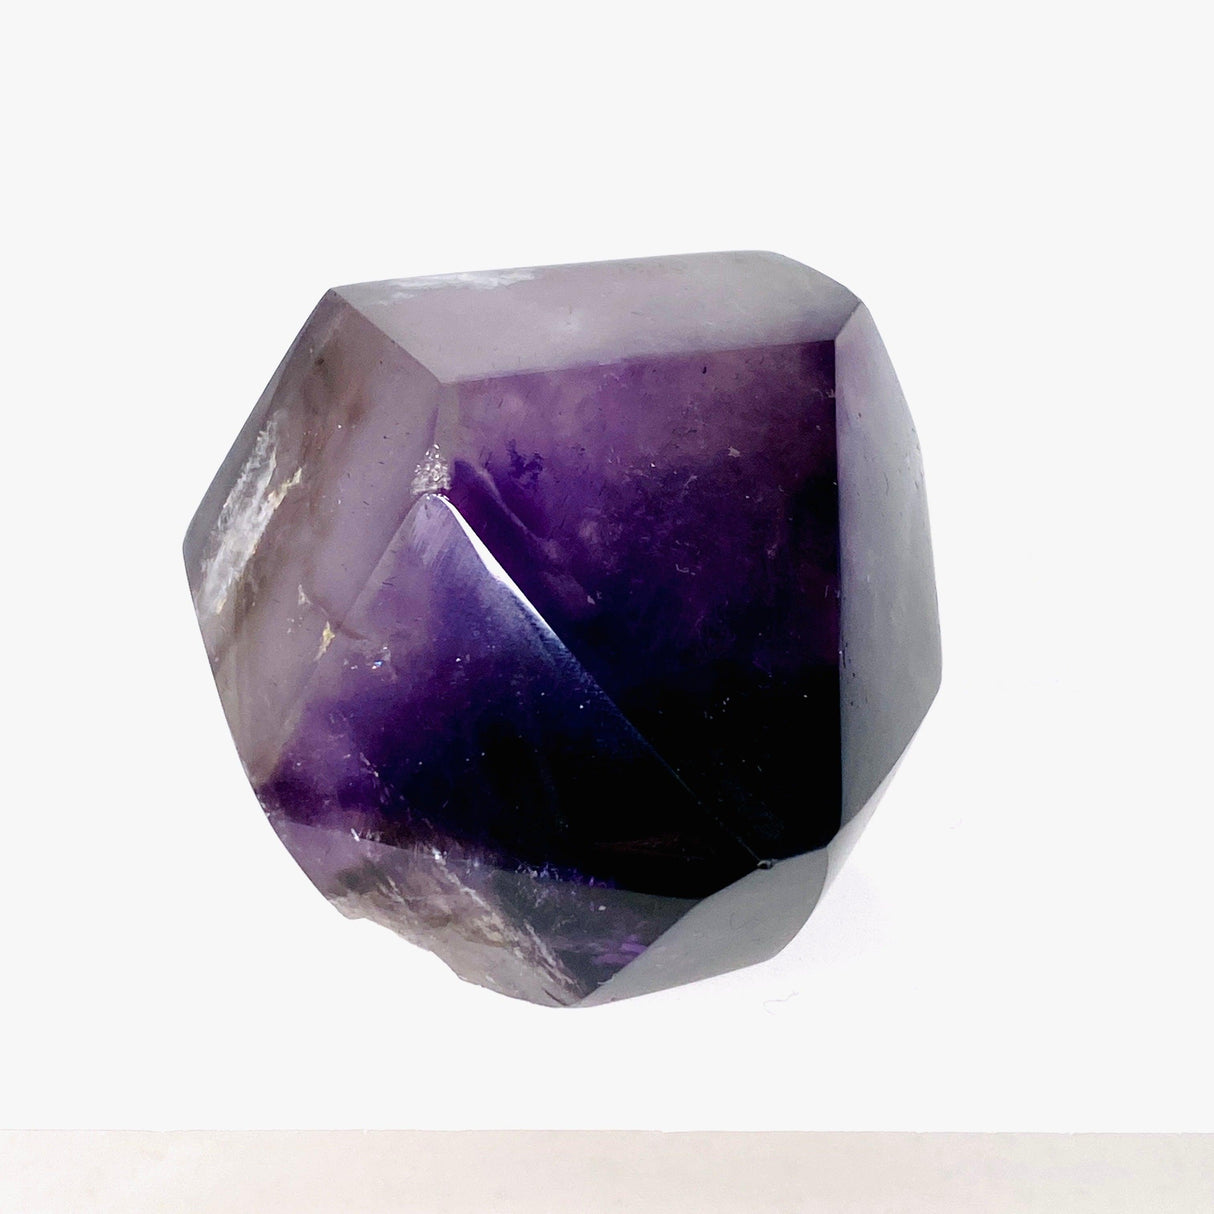 Smokey Amethyst polished double terminated crystal CR3530 - Nature's Magick